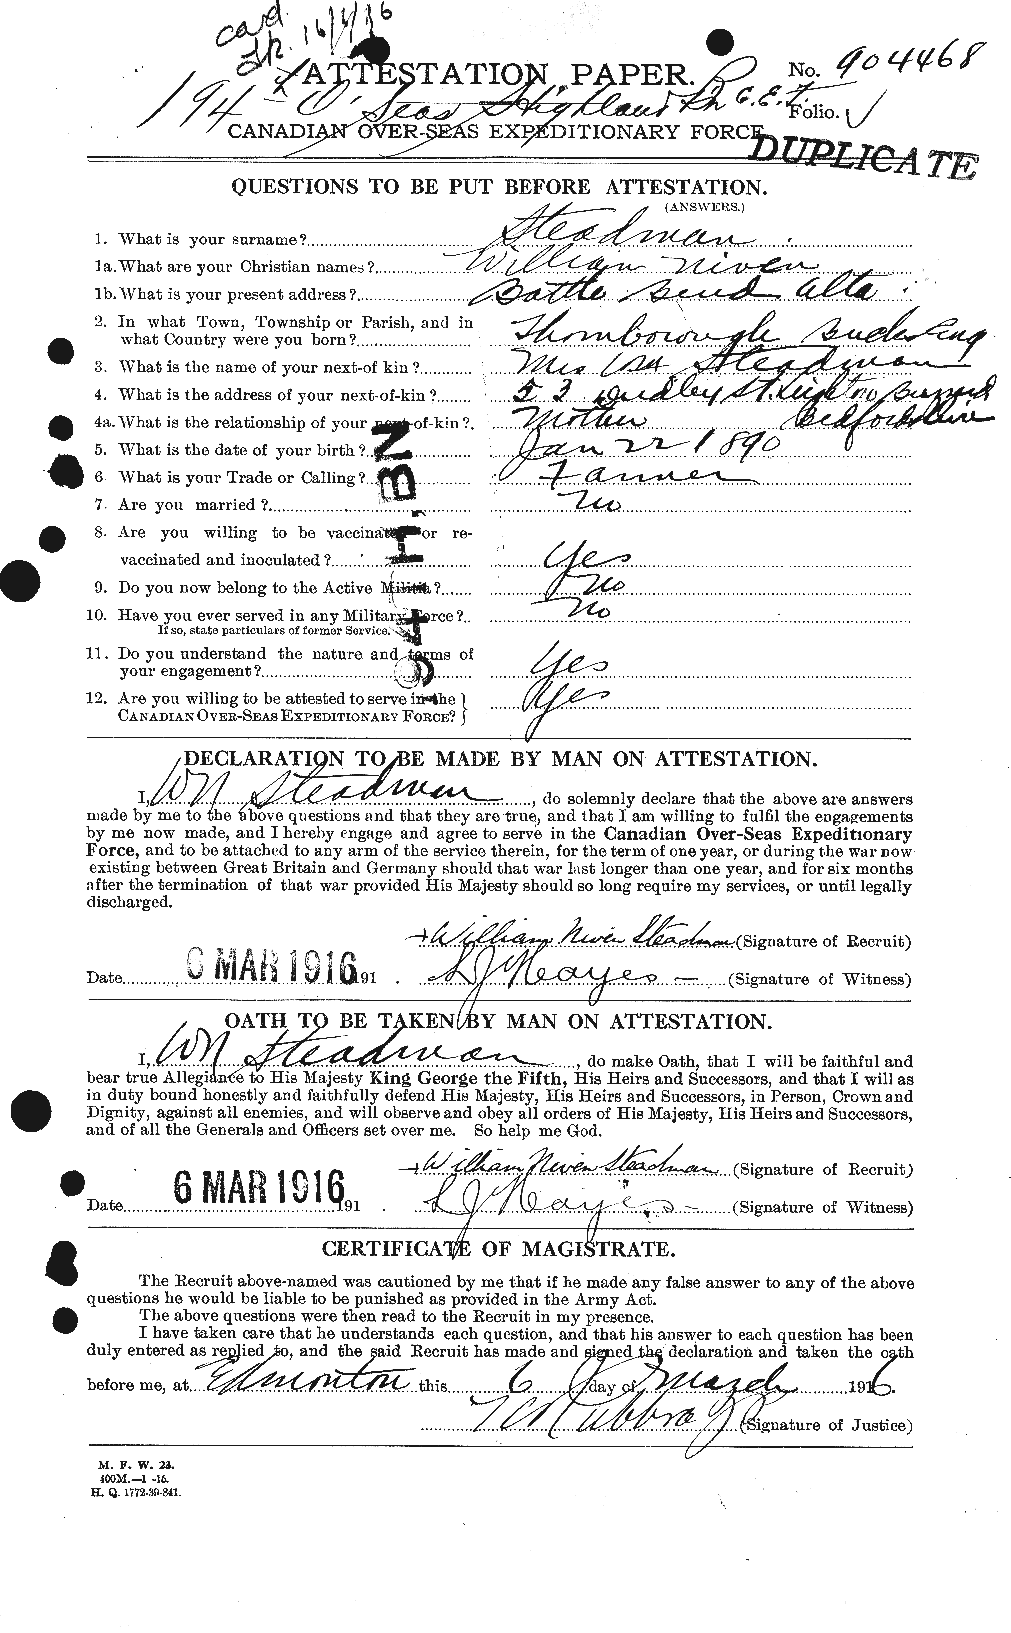 Personnel Records of the First World War - CEF 115486a